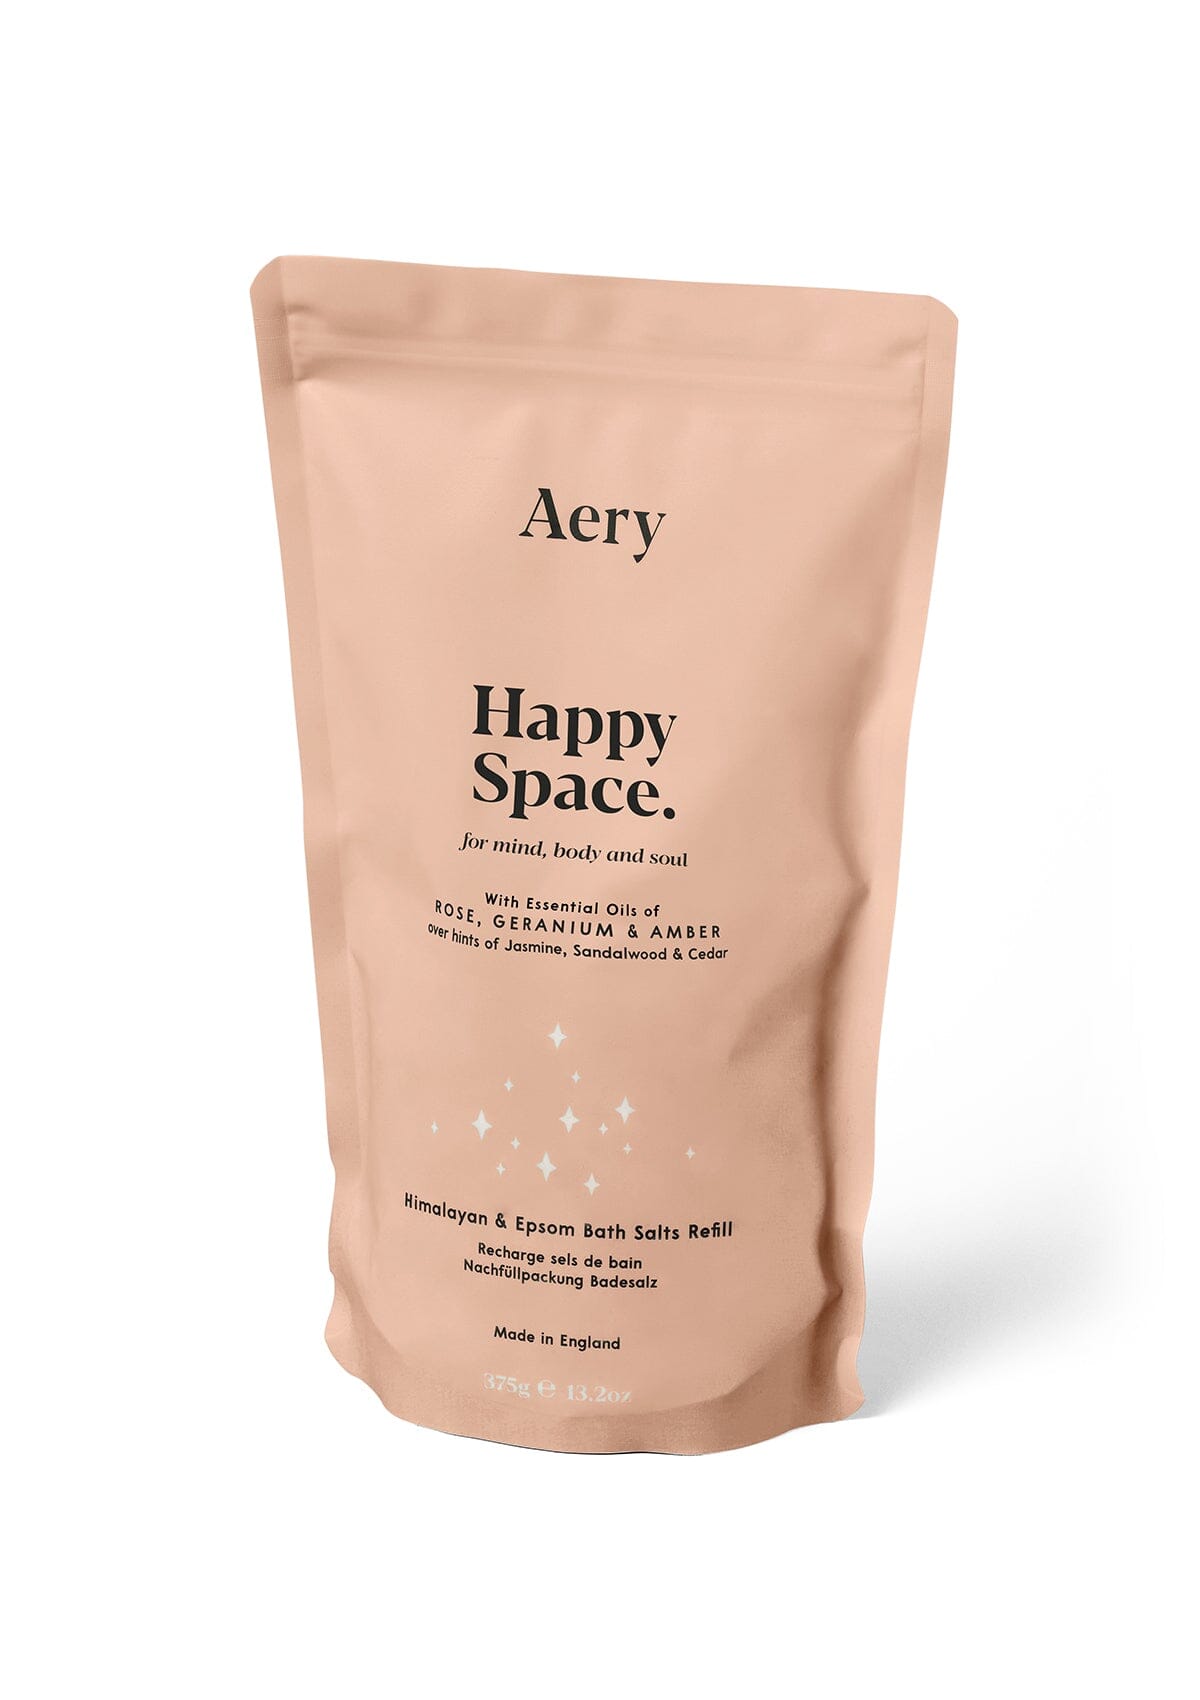 Pink Happy space bath salts refill pouch by Aery displayed on white background